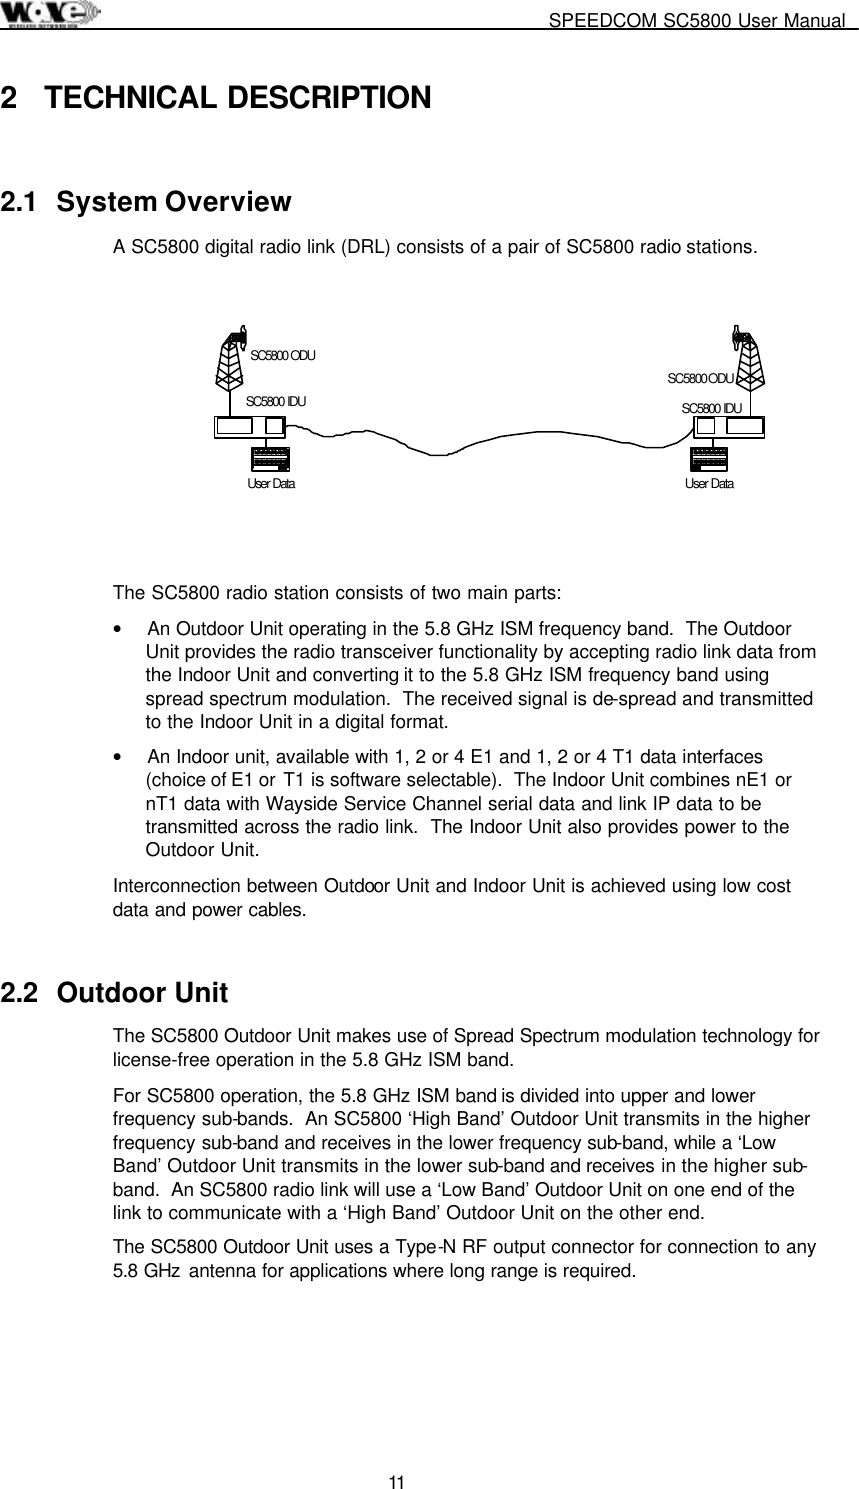     SPEEDCOM SC5800 User Manual  11  2 TECHNICAL DESCRIPTION 2.1 System Overview A SC5800 digital radio link (DRL) consists of a pair of SC5800 radio stations.    The SC5800 radio station consists of two main parts: •  An Outdoor Unit operating in the 5.8 GHz ISM frequency band.  The Outdoor Unit provides the radio transceiver functionality by accepting radio link data from the Indoor Unit and converting it to the 5.8 GHz ISM frequency band using spread spectrum modulation.  The received signal is de-spread and transmitted to the Indoor Unit in a digital format. •  An Indoor unit, available with 1, 2 or 4 E1 and 1, 2 or 4 T1 data interfaces (choice of E1 or T1 is software selectable).  The Indoor Unit combines nE1 or nT1 data with Wayside Service Channel serial data and link IP data to be transmitted across the radio link.  The Indoor Unit also provides power to the Outdoor Unit. Interconnection between Outdoor Unit and Indoor Unit is achieved using low cost data and power cables. 2.2 Outdoor Unit The SC5800 Outdoor Unit makes use of Spread Spectrum modulation technology for license-free operation in the 5.8 GHz ISM band. For SC5800 operation, the 5.8 GHz ISM band is divided into upper and lower frequency sub-bands.  An SC5800 ‘High Band’ Outdoor Unit transmits in the higher frequency sub-band and receives in the lower frequency sub-band, while a ‘Low Band’ Outdoor Unit transmits in the lower sub-band and receives in the higher sub-band.  An SC5800 radio link will use a ‘Low Band’ Outdoor Unit on one end of the link to communicate with a ‘High Band’ Outdoor Unit on the other end. The SC5800 Outdoor Unit uses a Type-N RF output connector for connection to any 5.8 GHz  antenna for applications where long range is required.     User DataSC5800 ODUSC5800 IDUUser DataSC5800 ODUSC5800 IDU